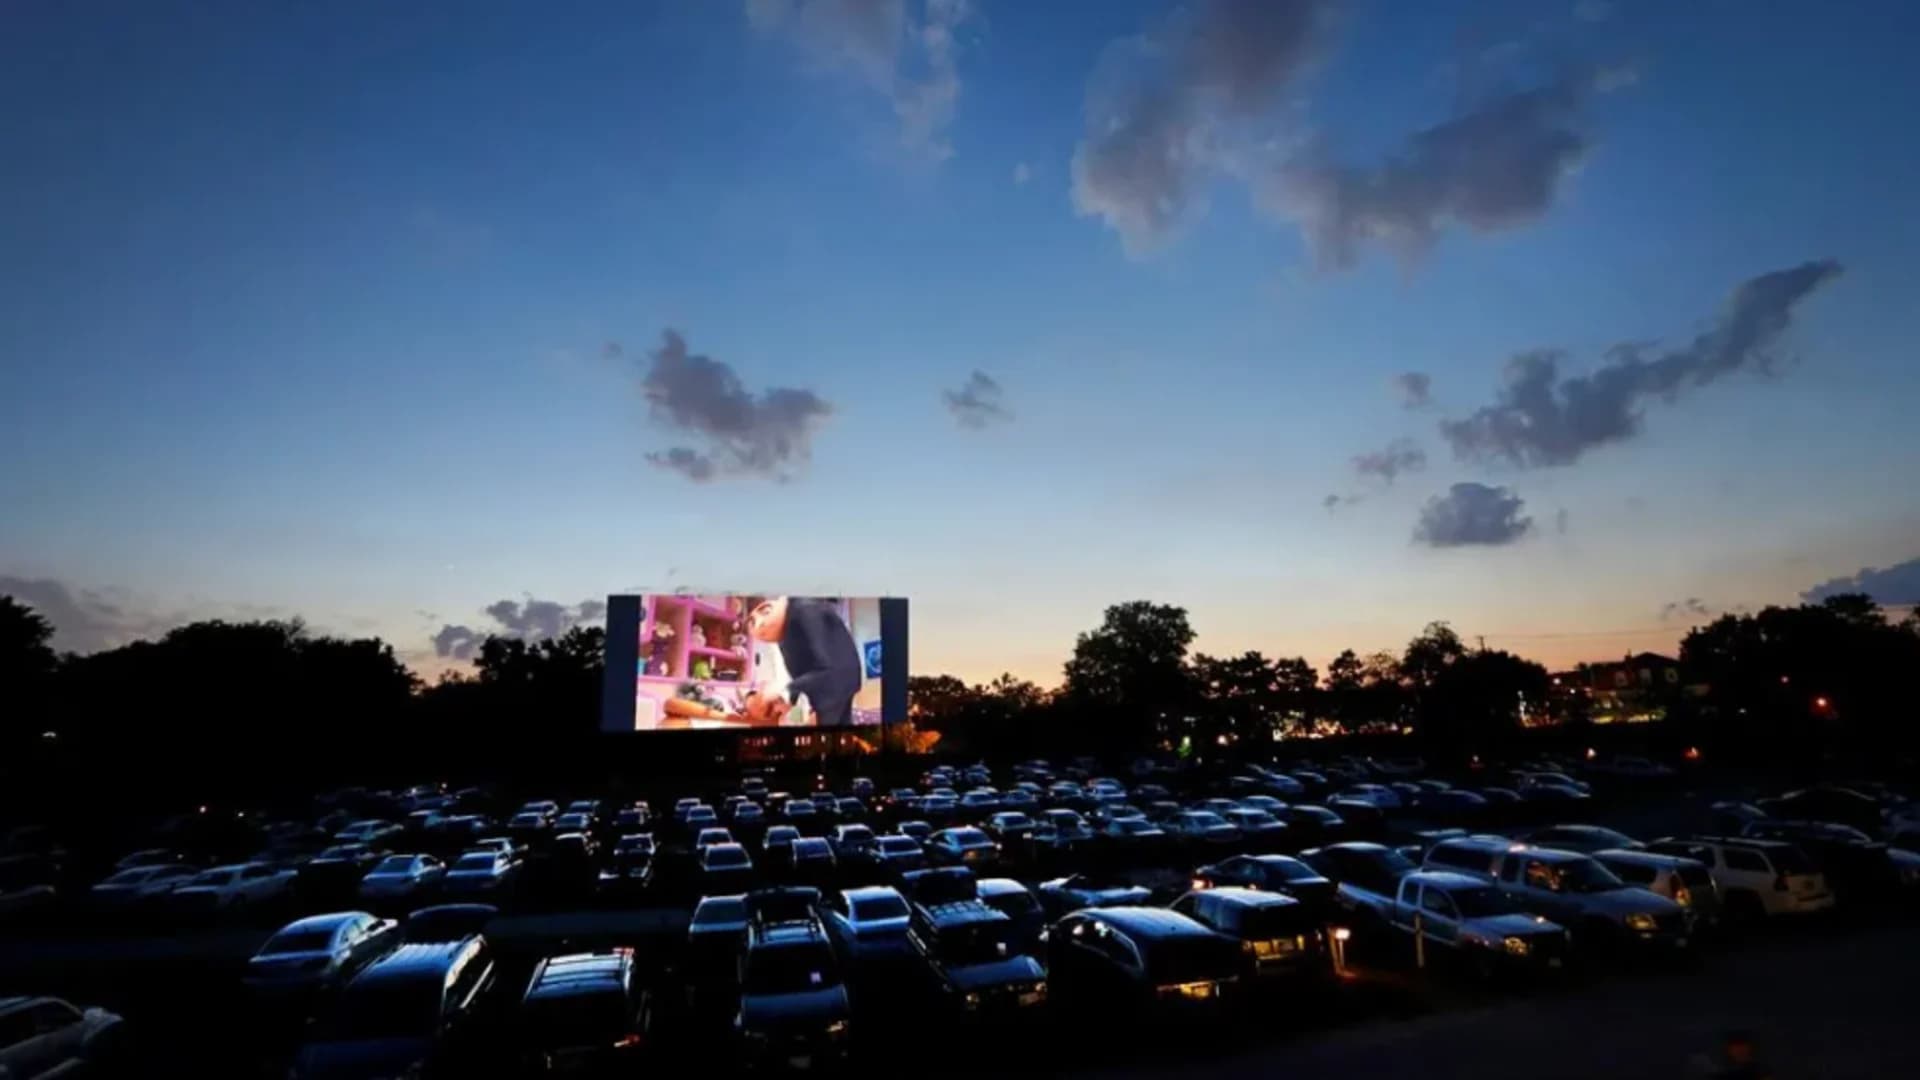 Guide: Drive-in and outdoor movie events around New Jersey